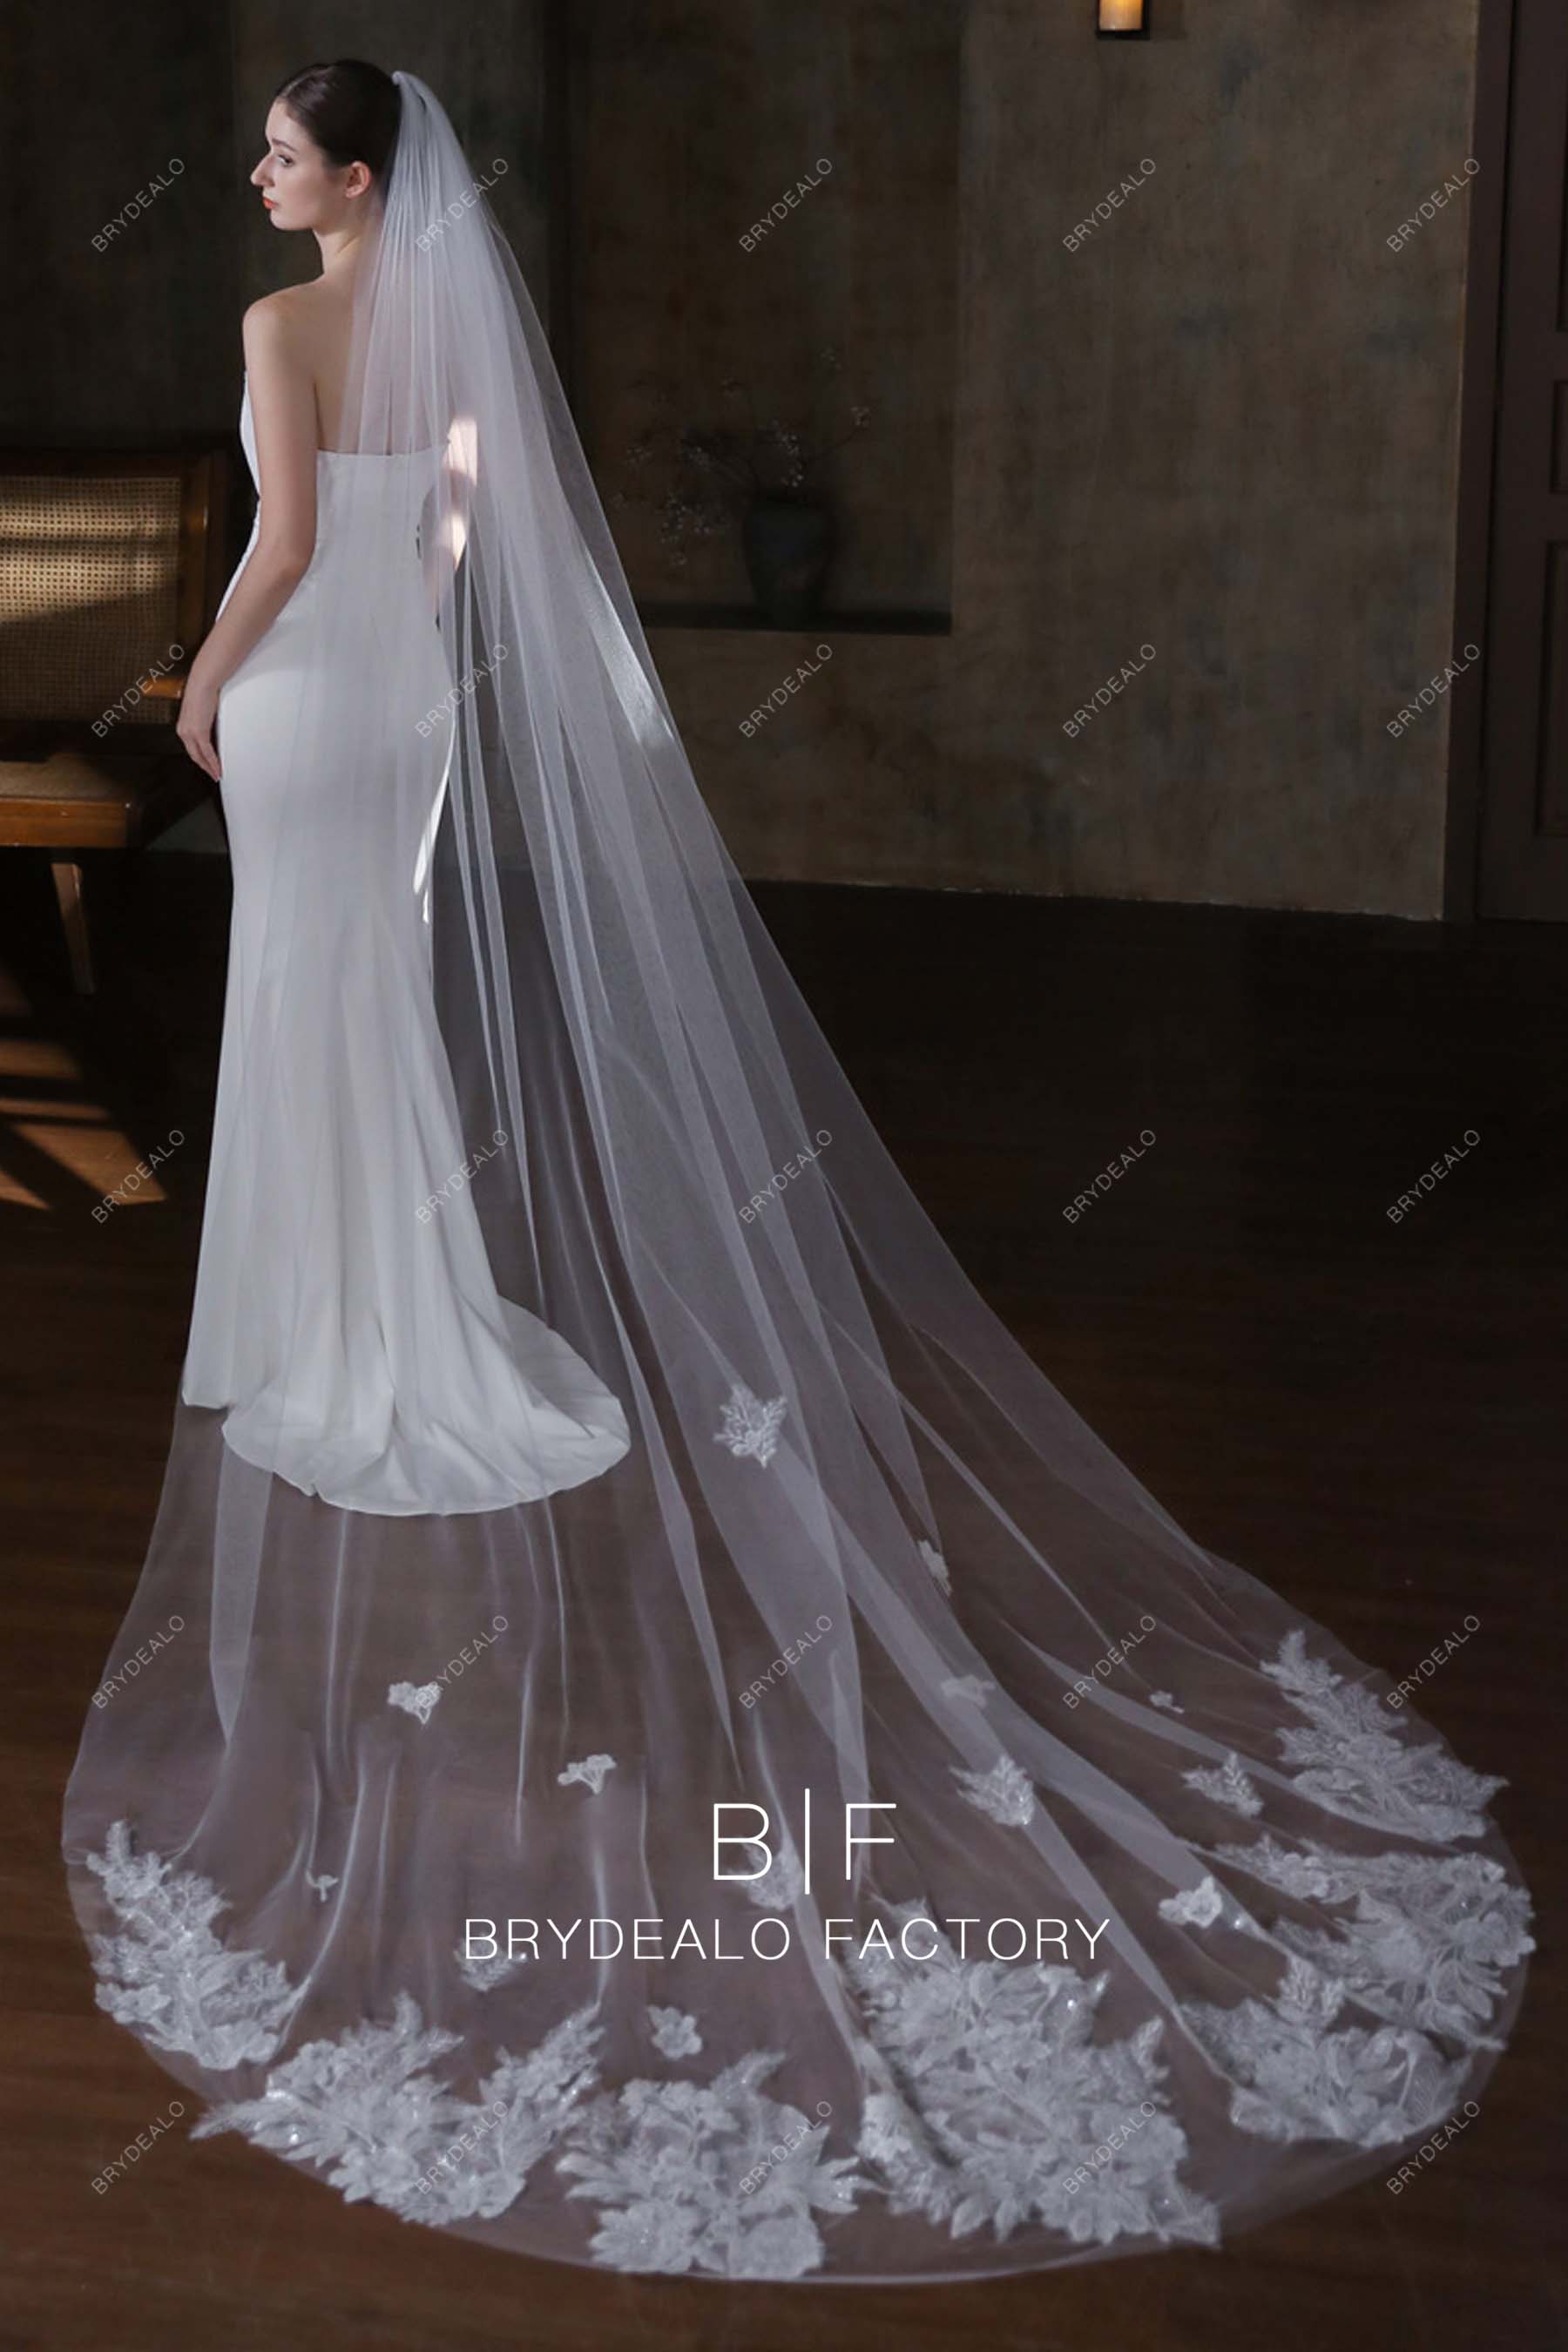 https://cdn.shopify.com/s/files/1/0558/7599/3647/files/sequined-lace-cathedral-length-wedding-veil-08175.jpg?v=1697010368&width=1800